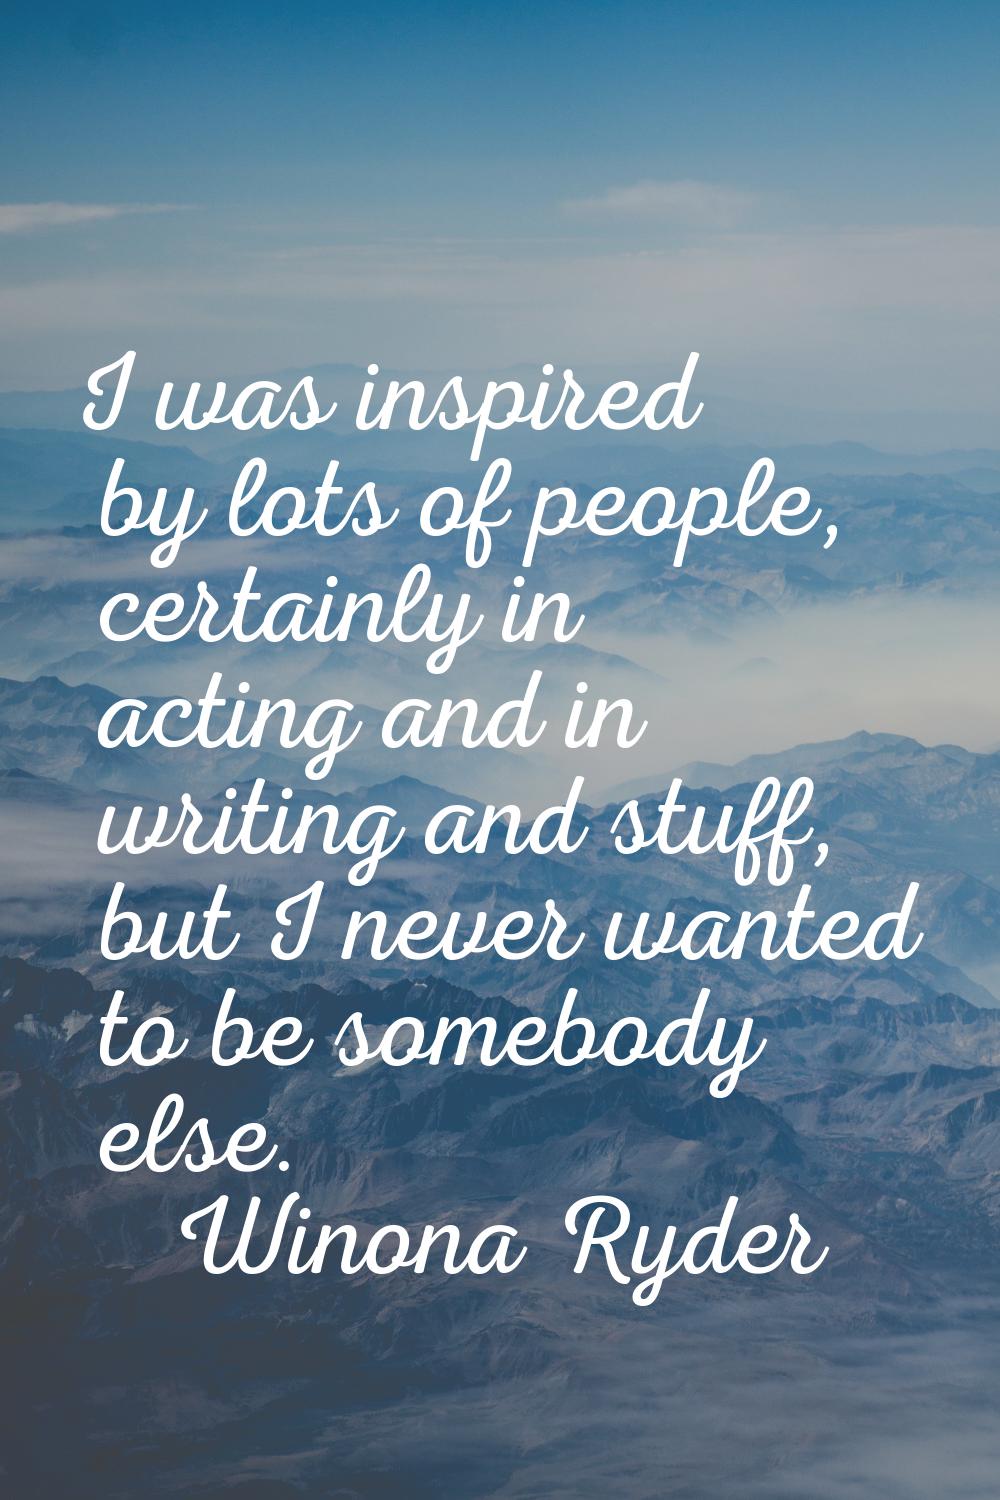 I was inspired by lots of people, certainly in acting and in writing and stuff, but I never wanted 